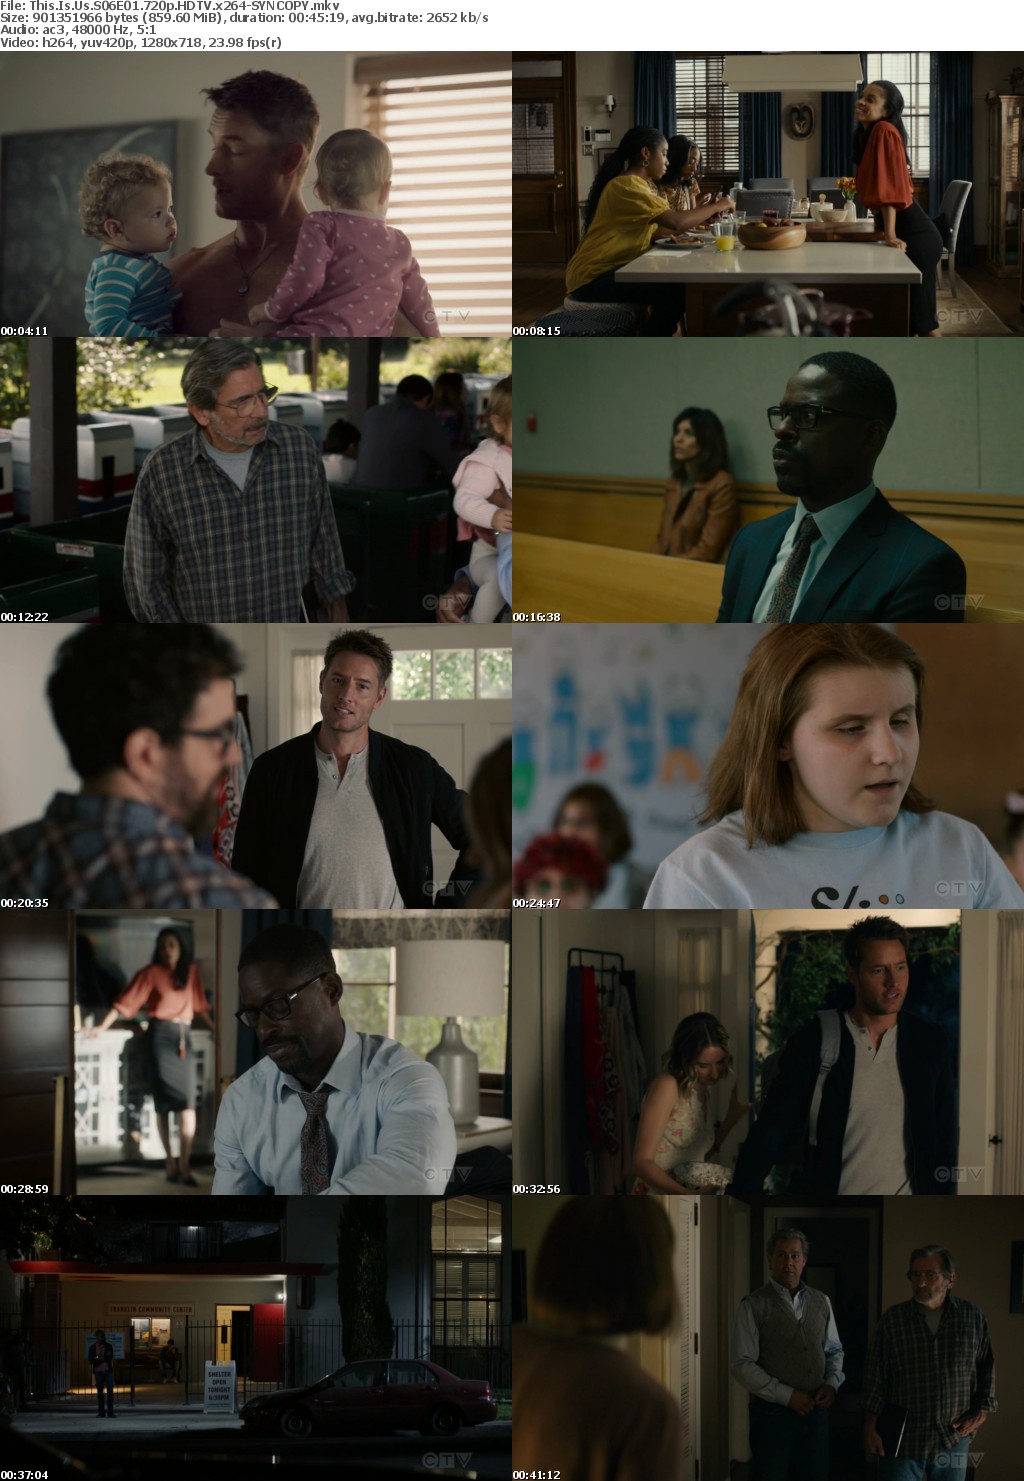 This Is Us S06E01 720p HDTV x264-SYNCOPY